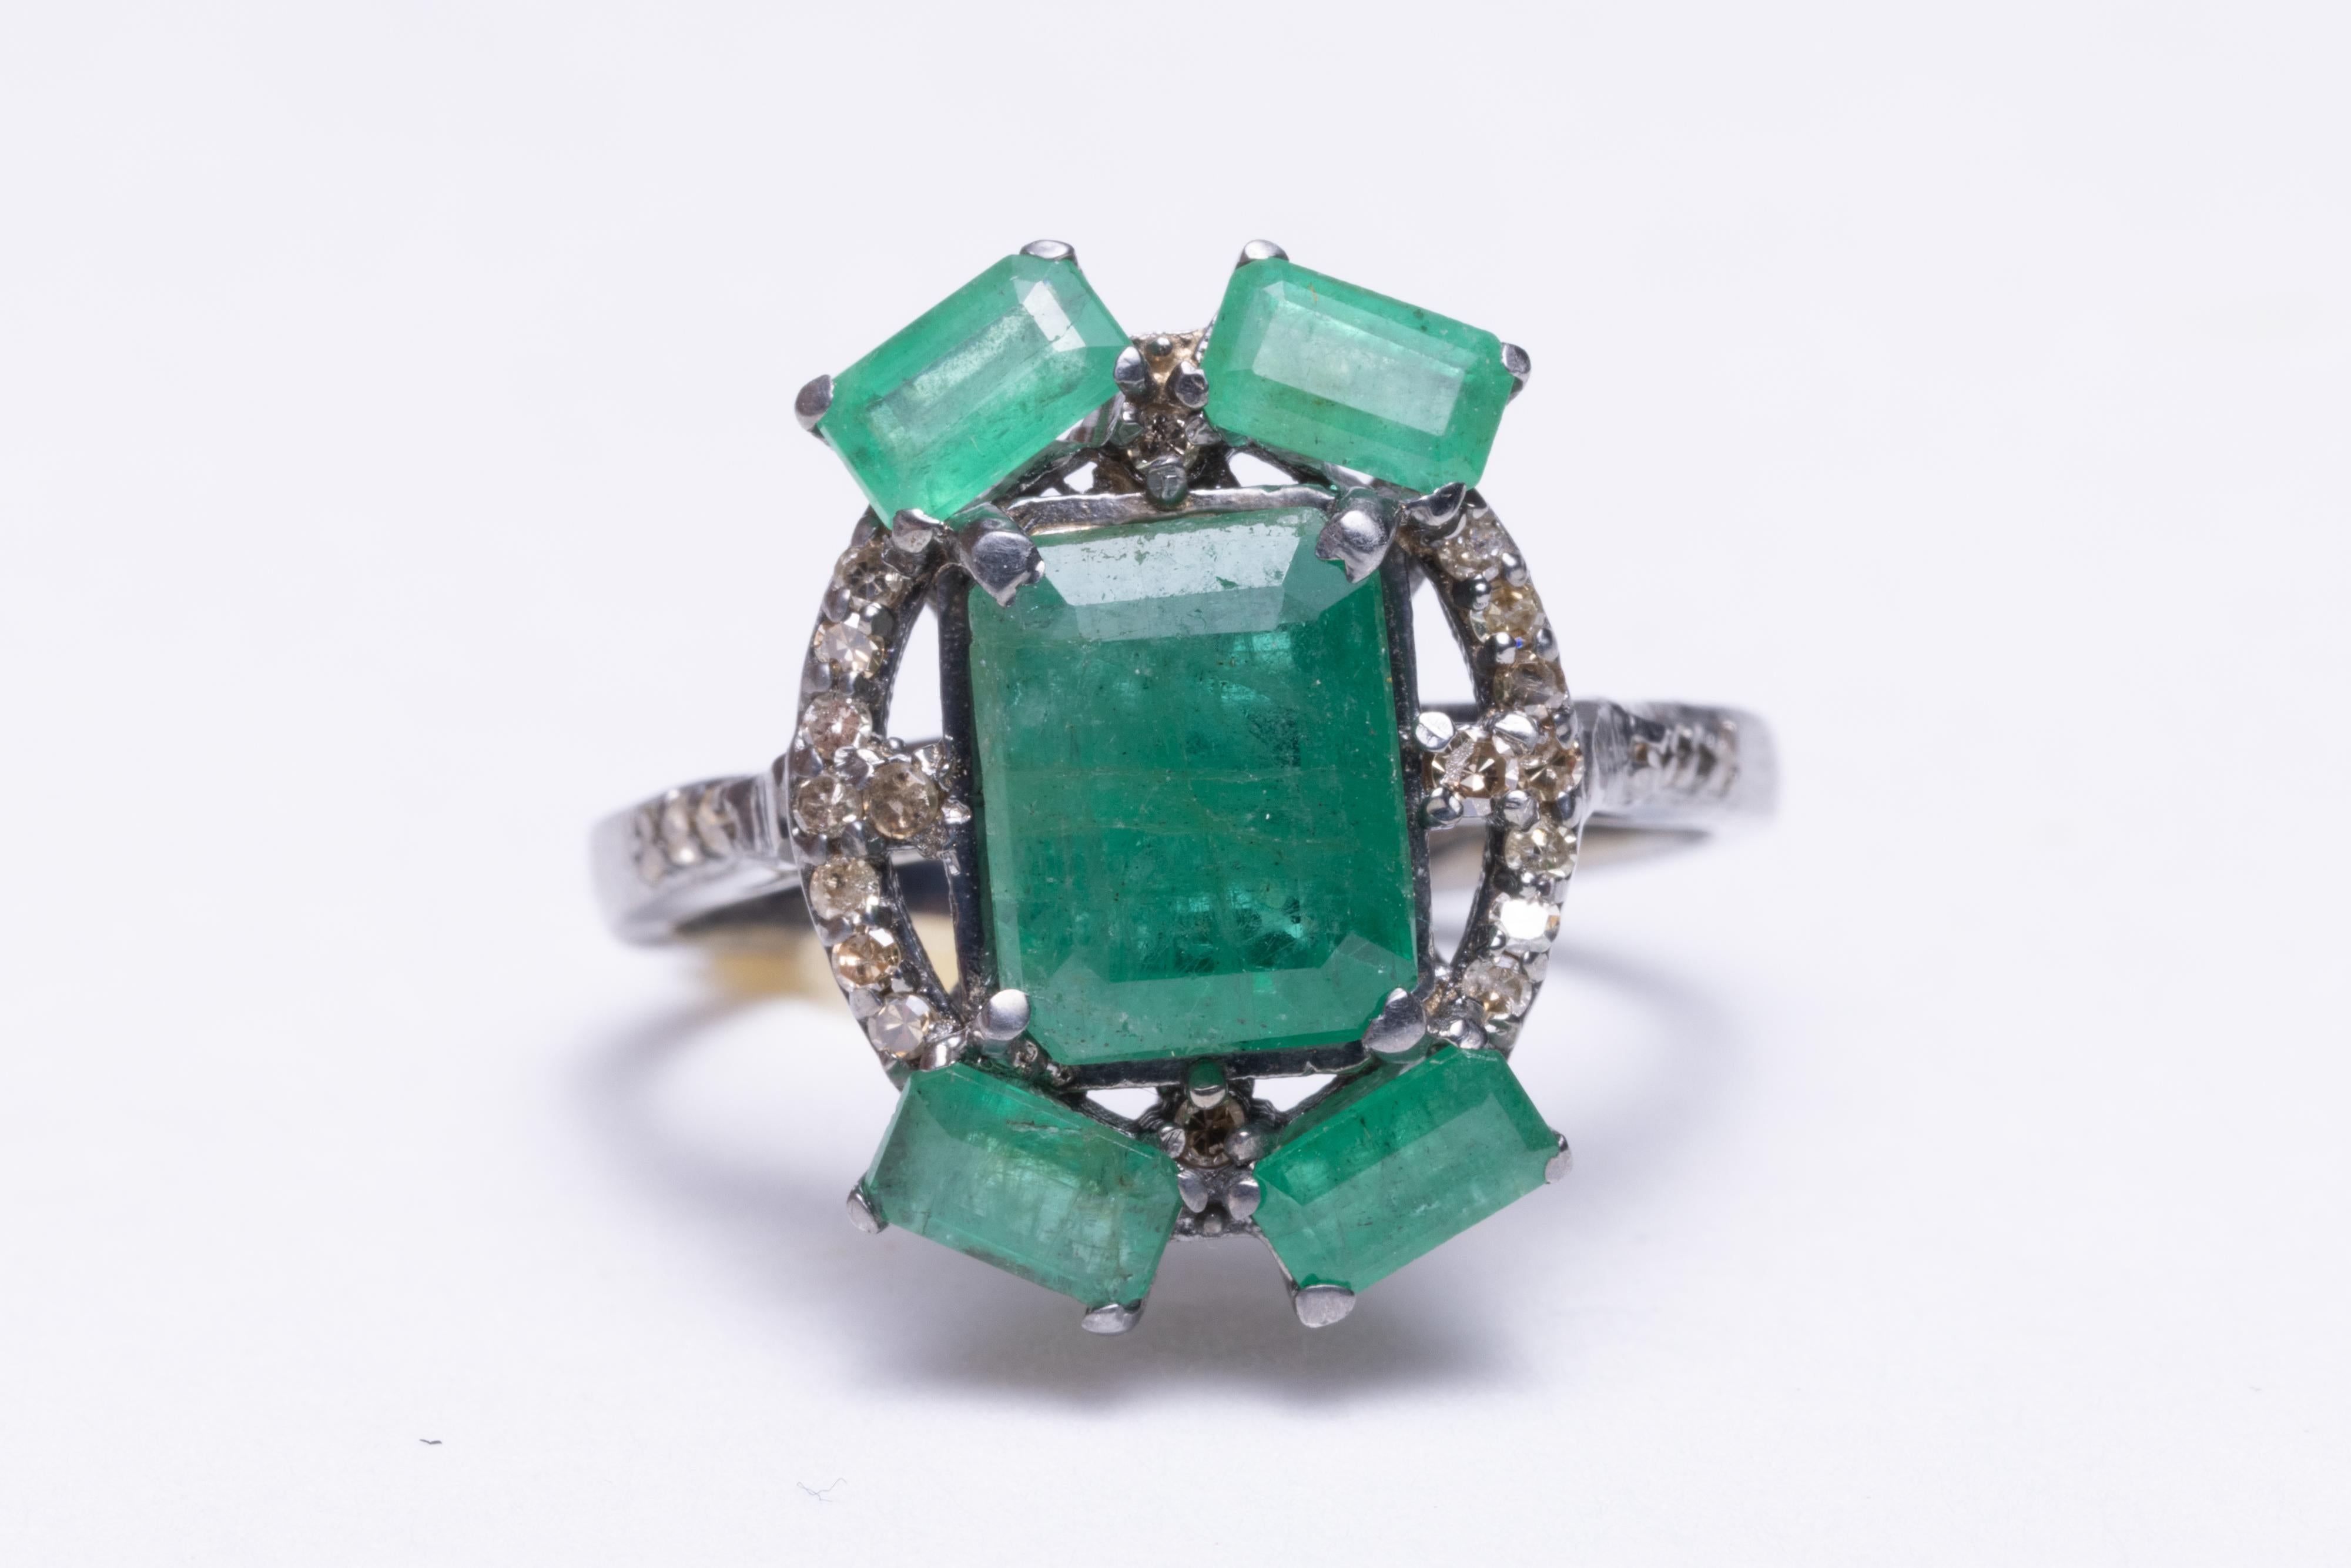 A large center emerald-cut emerald ring flanked with 4 smaller emeralds on the corners.  Pave`-set, round faceted diamonds around the face and along the shoulders of the band.  Set in an oxidized sterling silver.  Diamonds total .22 carats and the